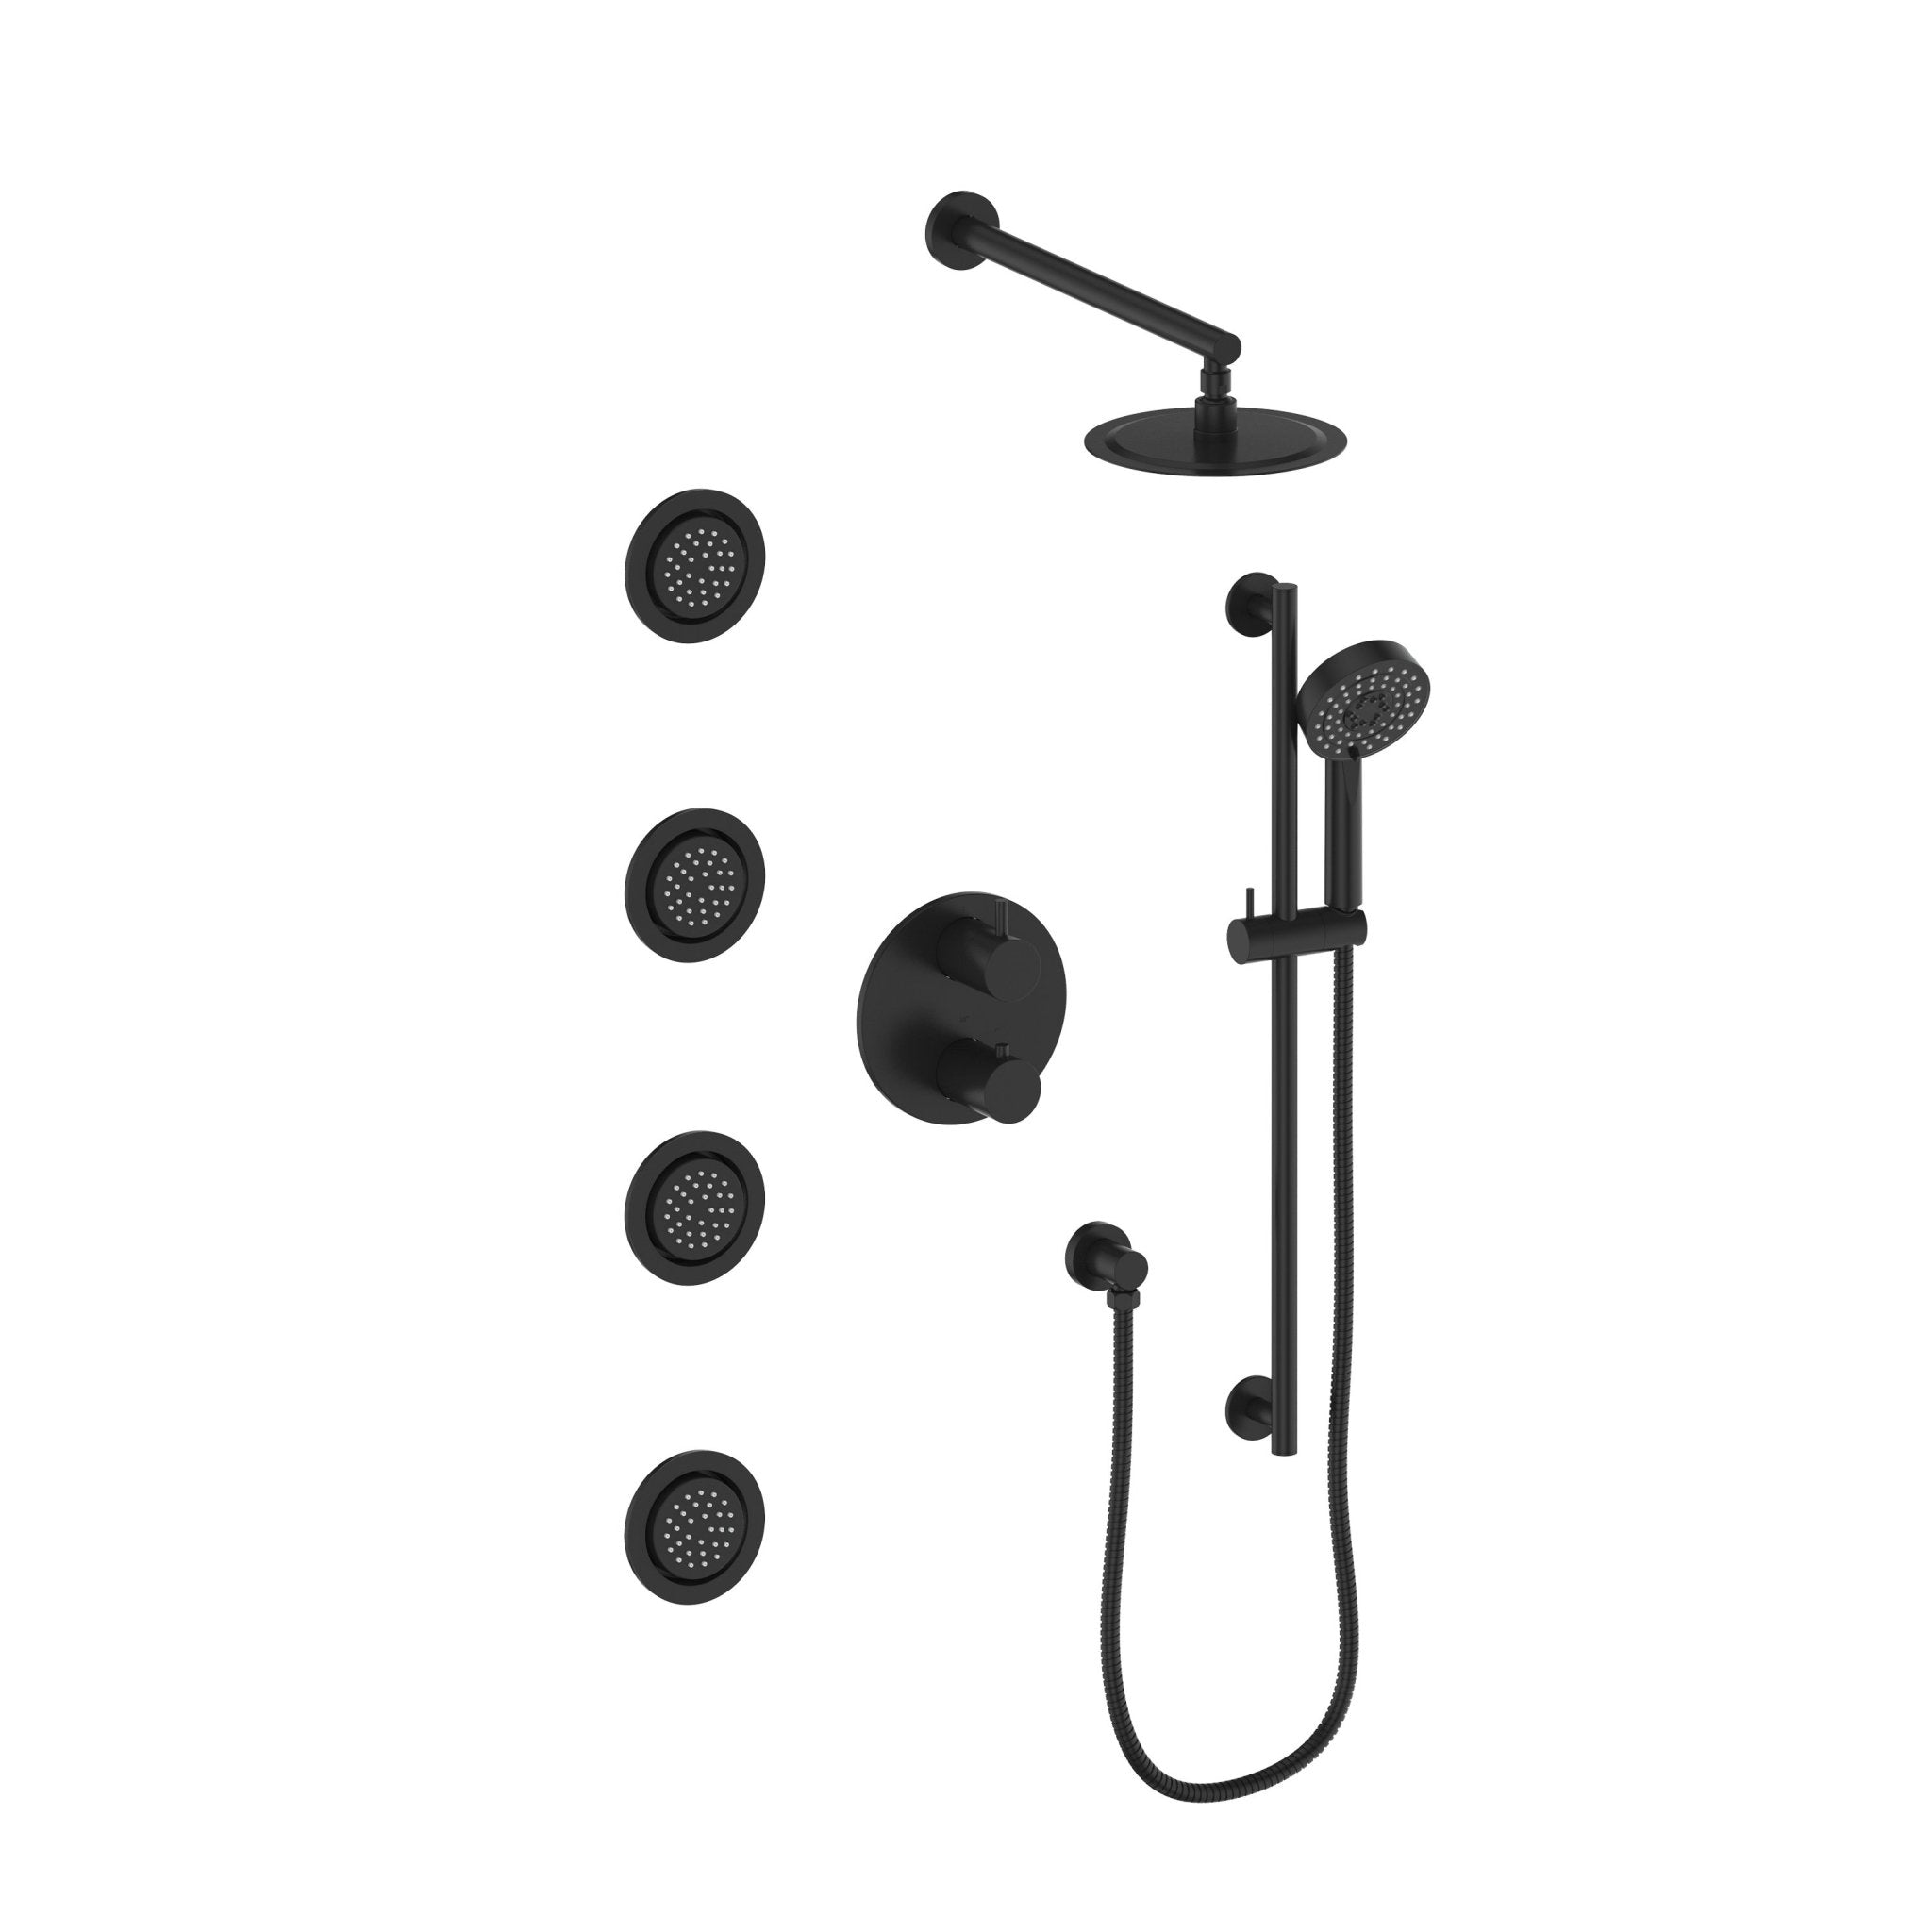 ZLINE Emerald Bay Thermostatic Shower System with Body Jets (EMBY-SHS-T3) in matte black